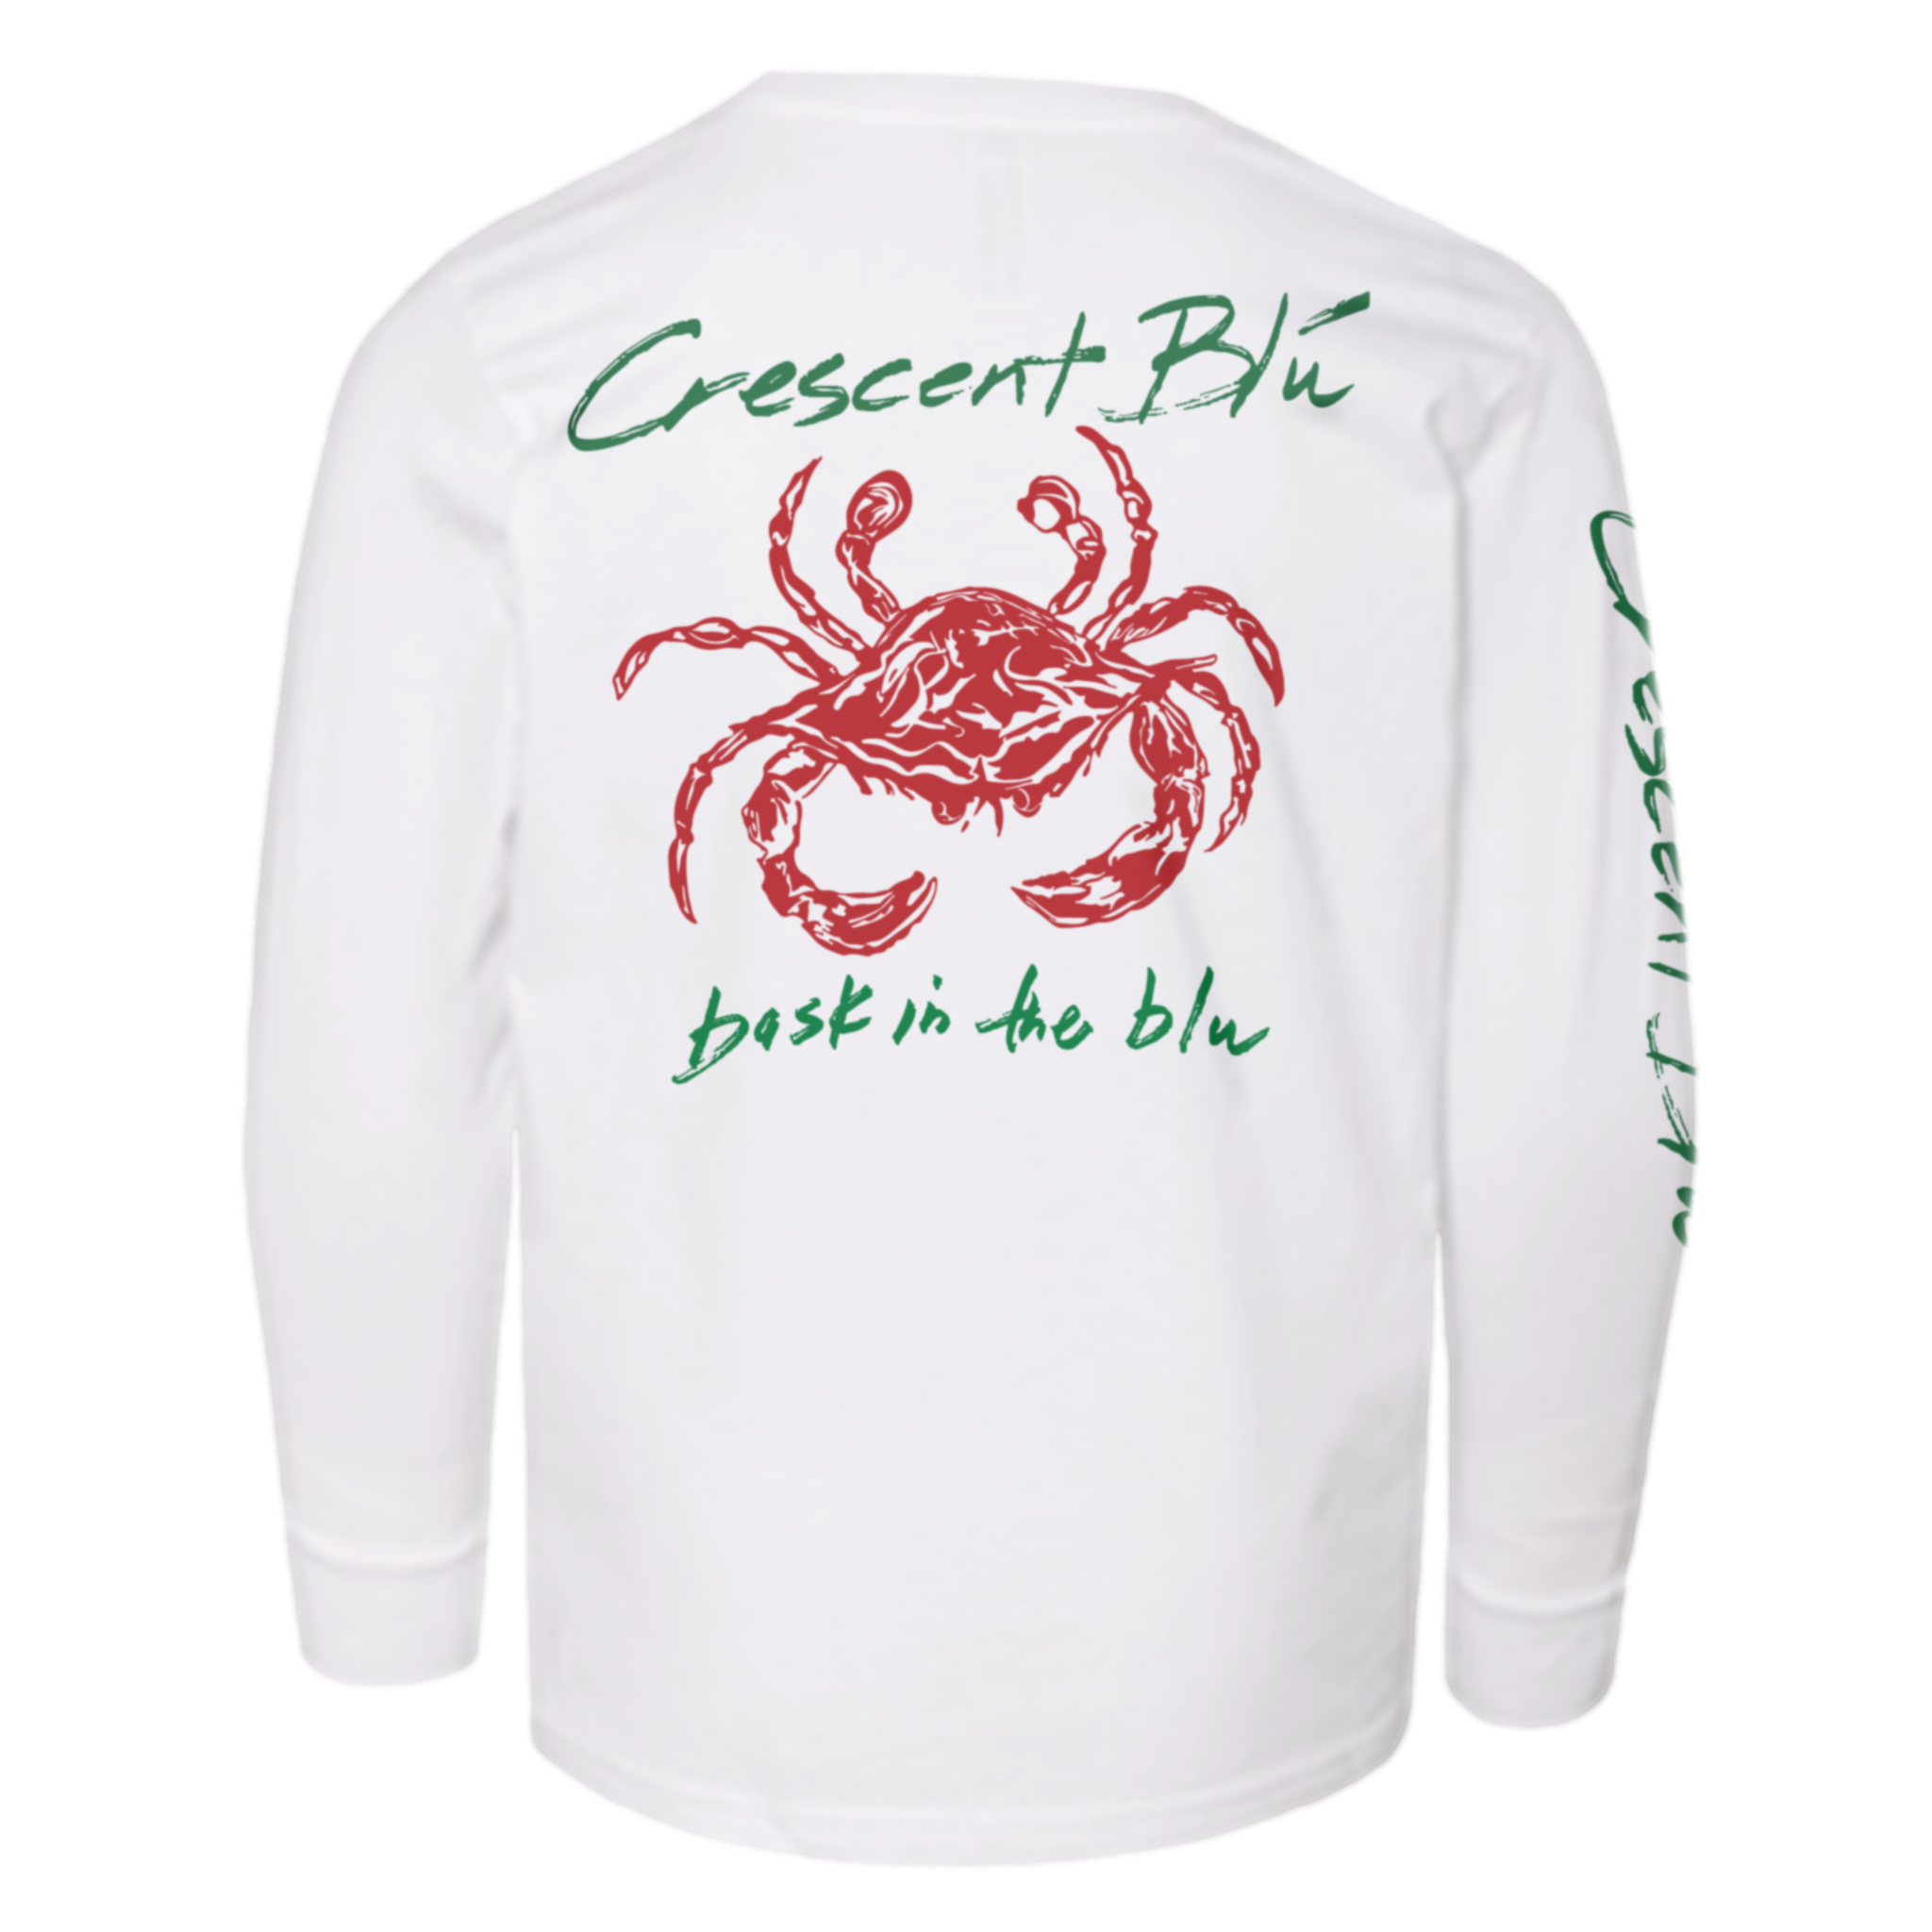 The back of a kids long sleeve tee with a red crab on the back. Written in green above the crab is "Crescent Blu" and below the crab is written "bask in the blu".